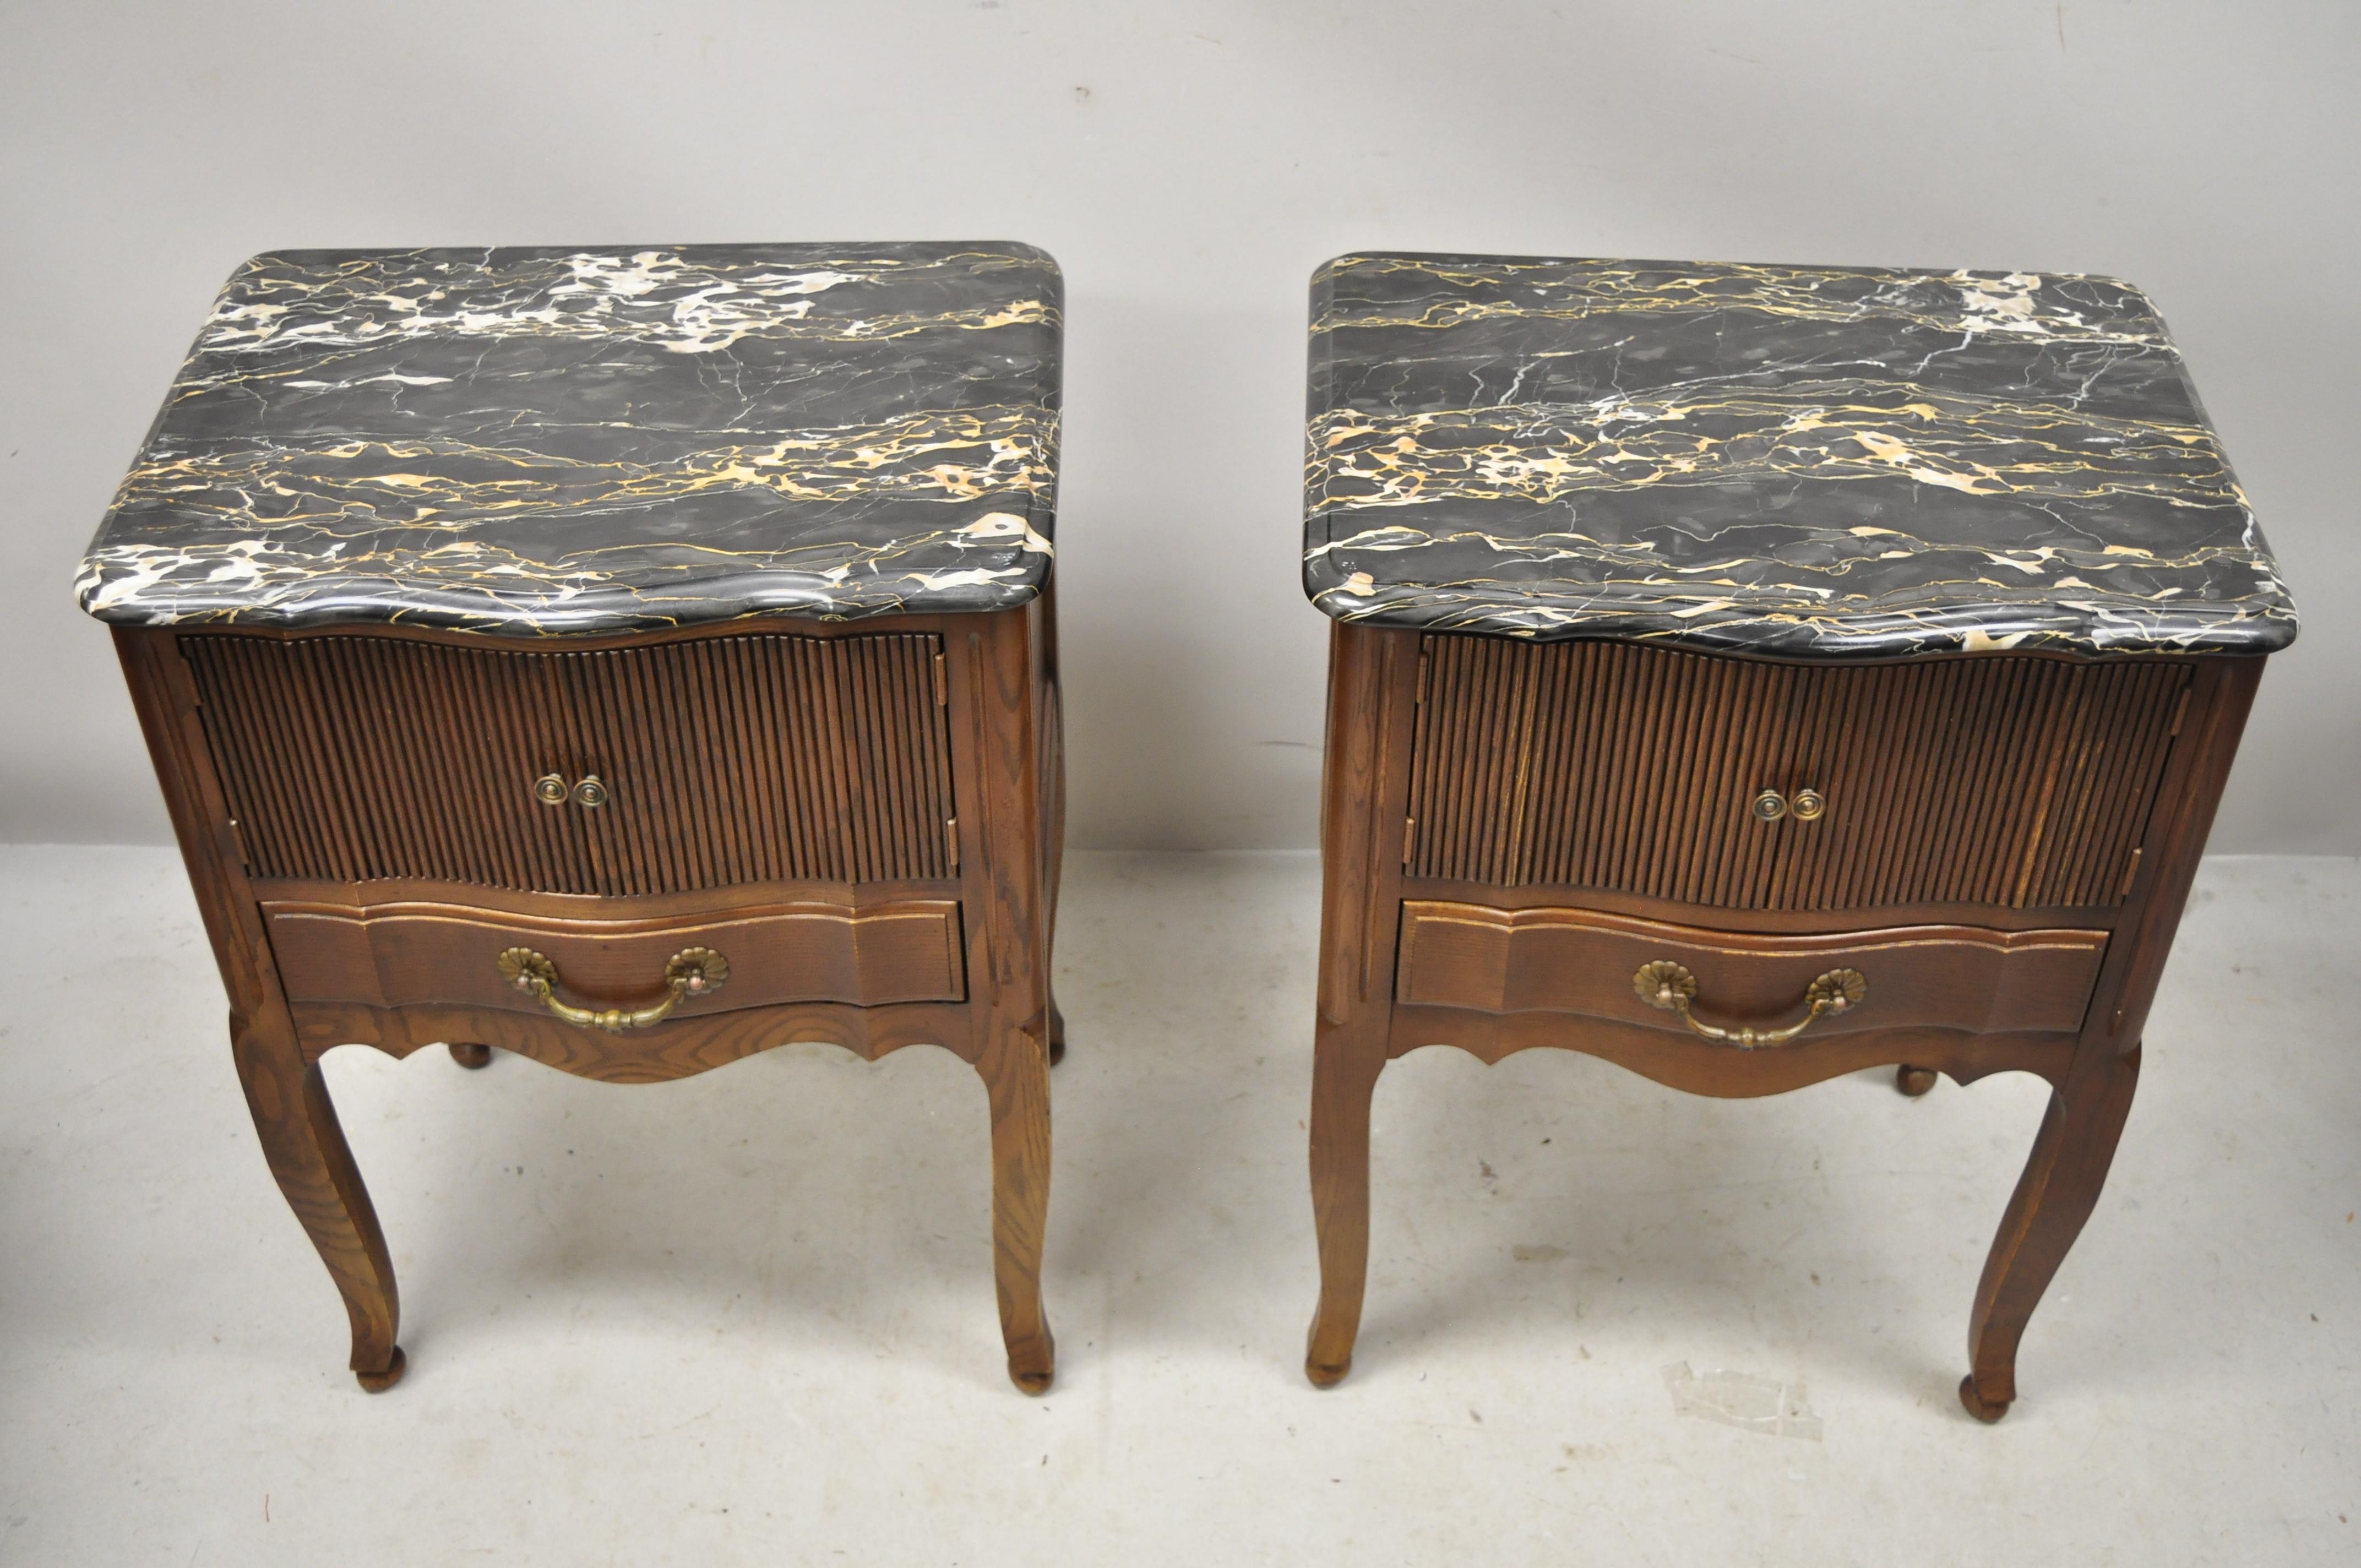 Davis Cabinet Company French country provincial oak marble-top nightstand bedside tables, a pair. Item features black marble tops, solid wood construction, beautiful wood grain, finished back, 2 swing doors, 2 drawers, cabriole legs, solid brass